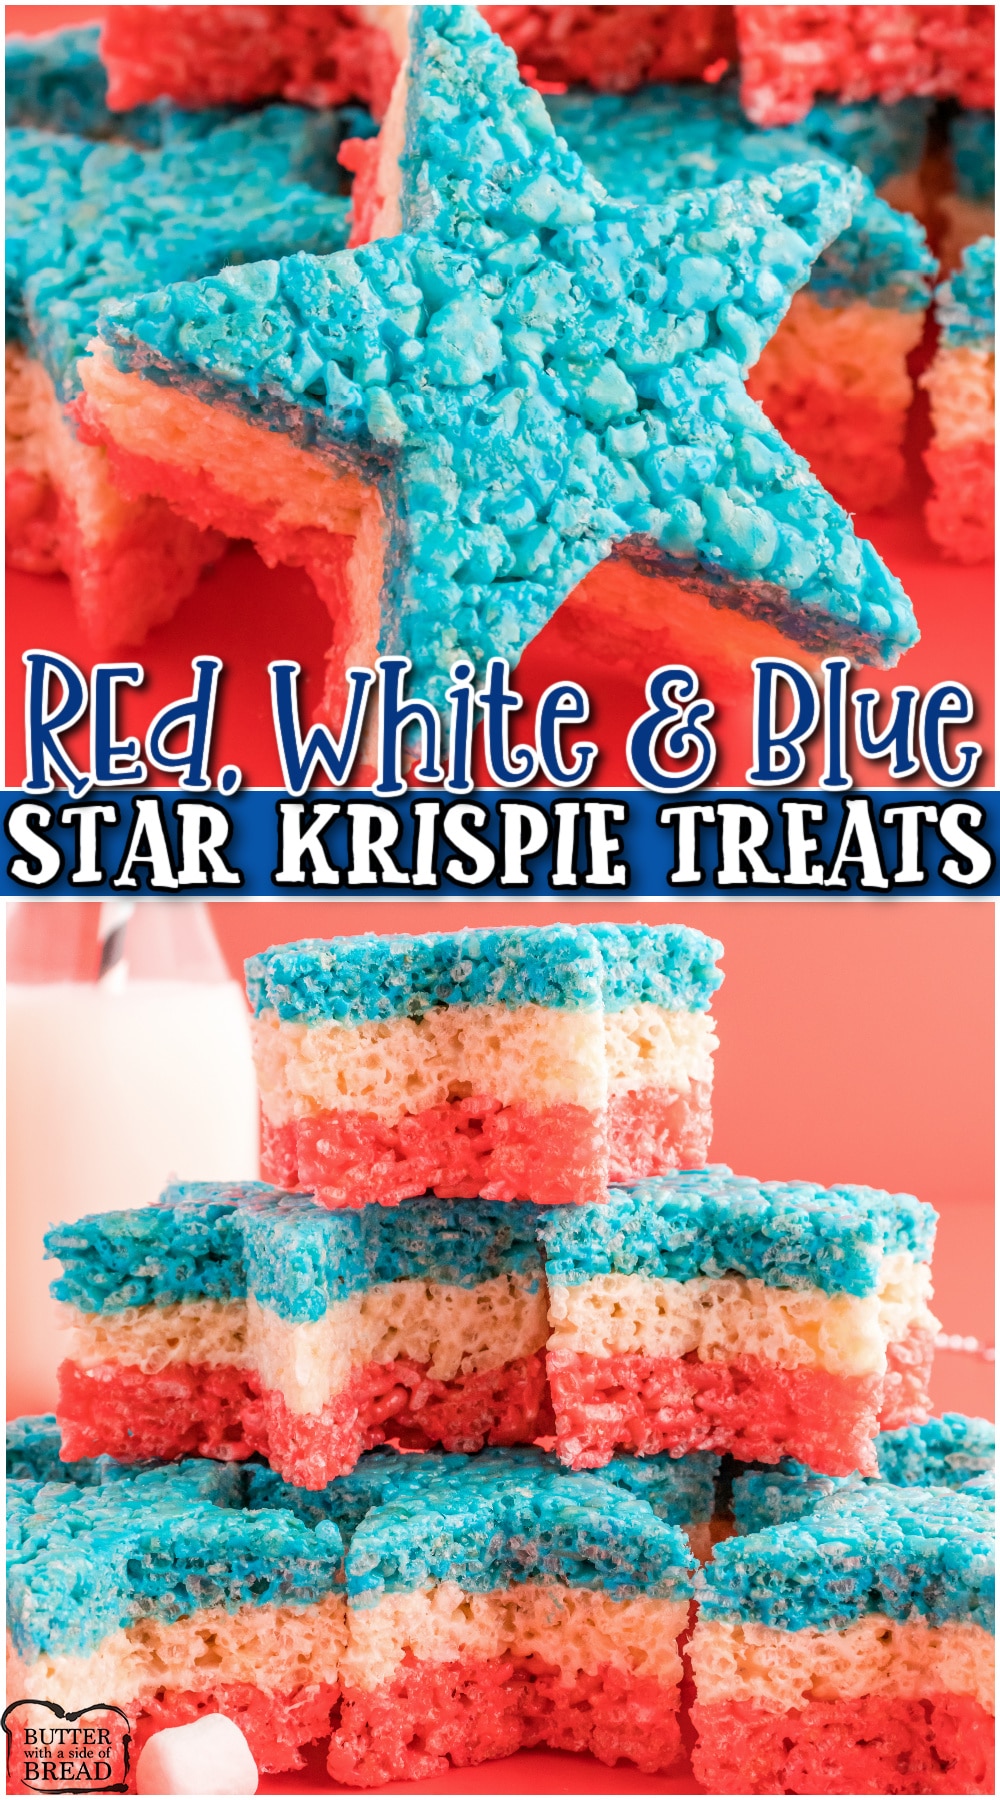 Red, White and Blue Star Krispie Treats are fun & festive marshmallow treats made into stars! Celebrate 4th of July with these delightful patriotic rice krispie treats! 